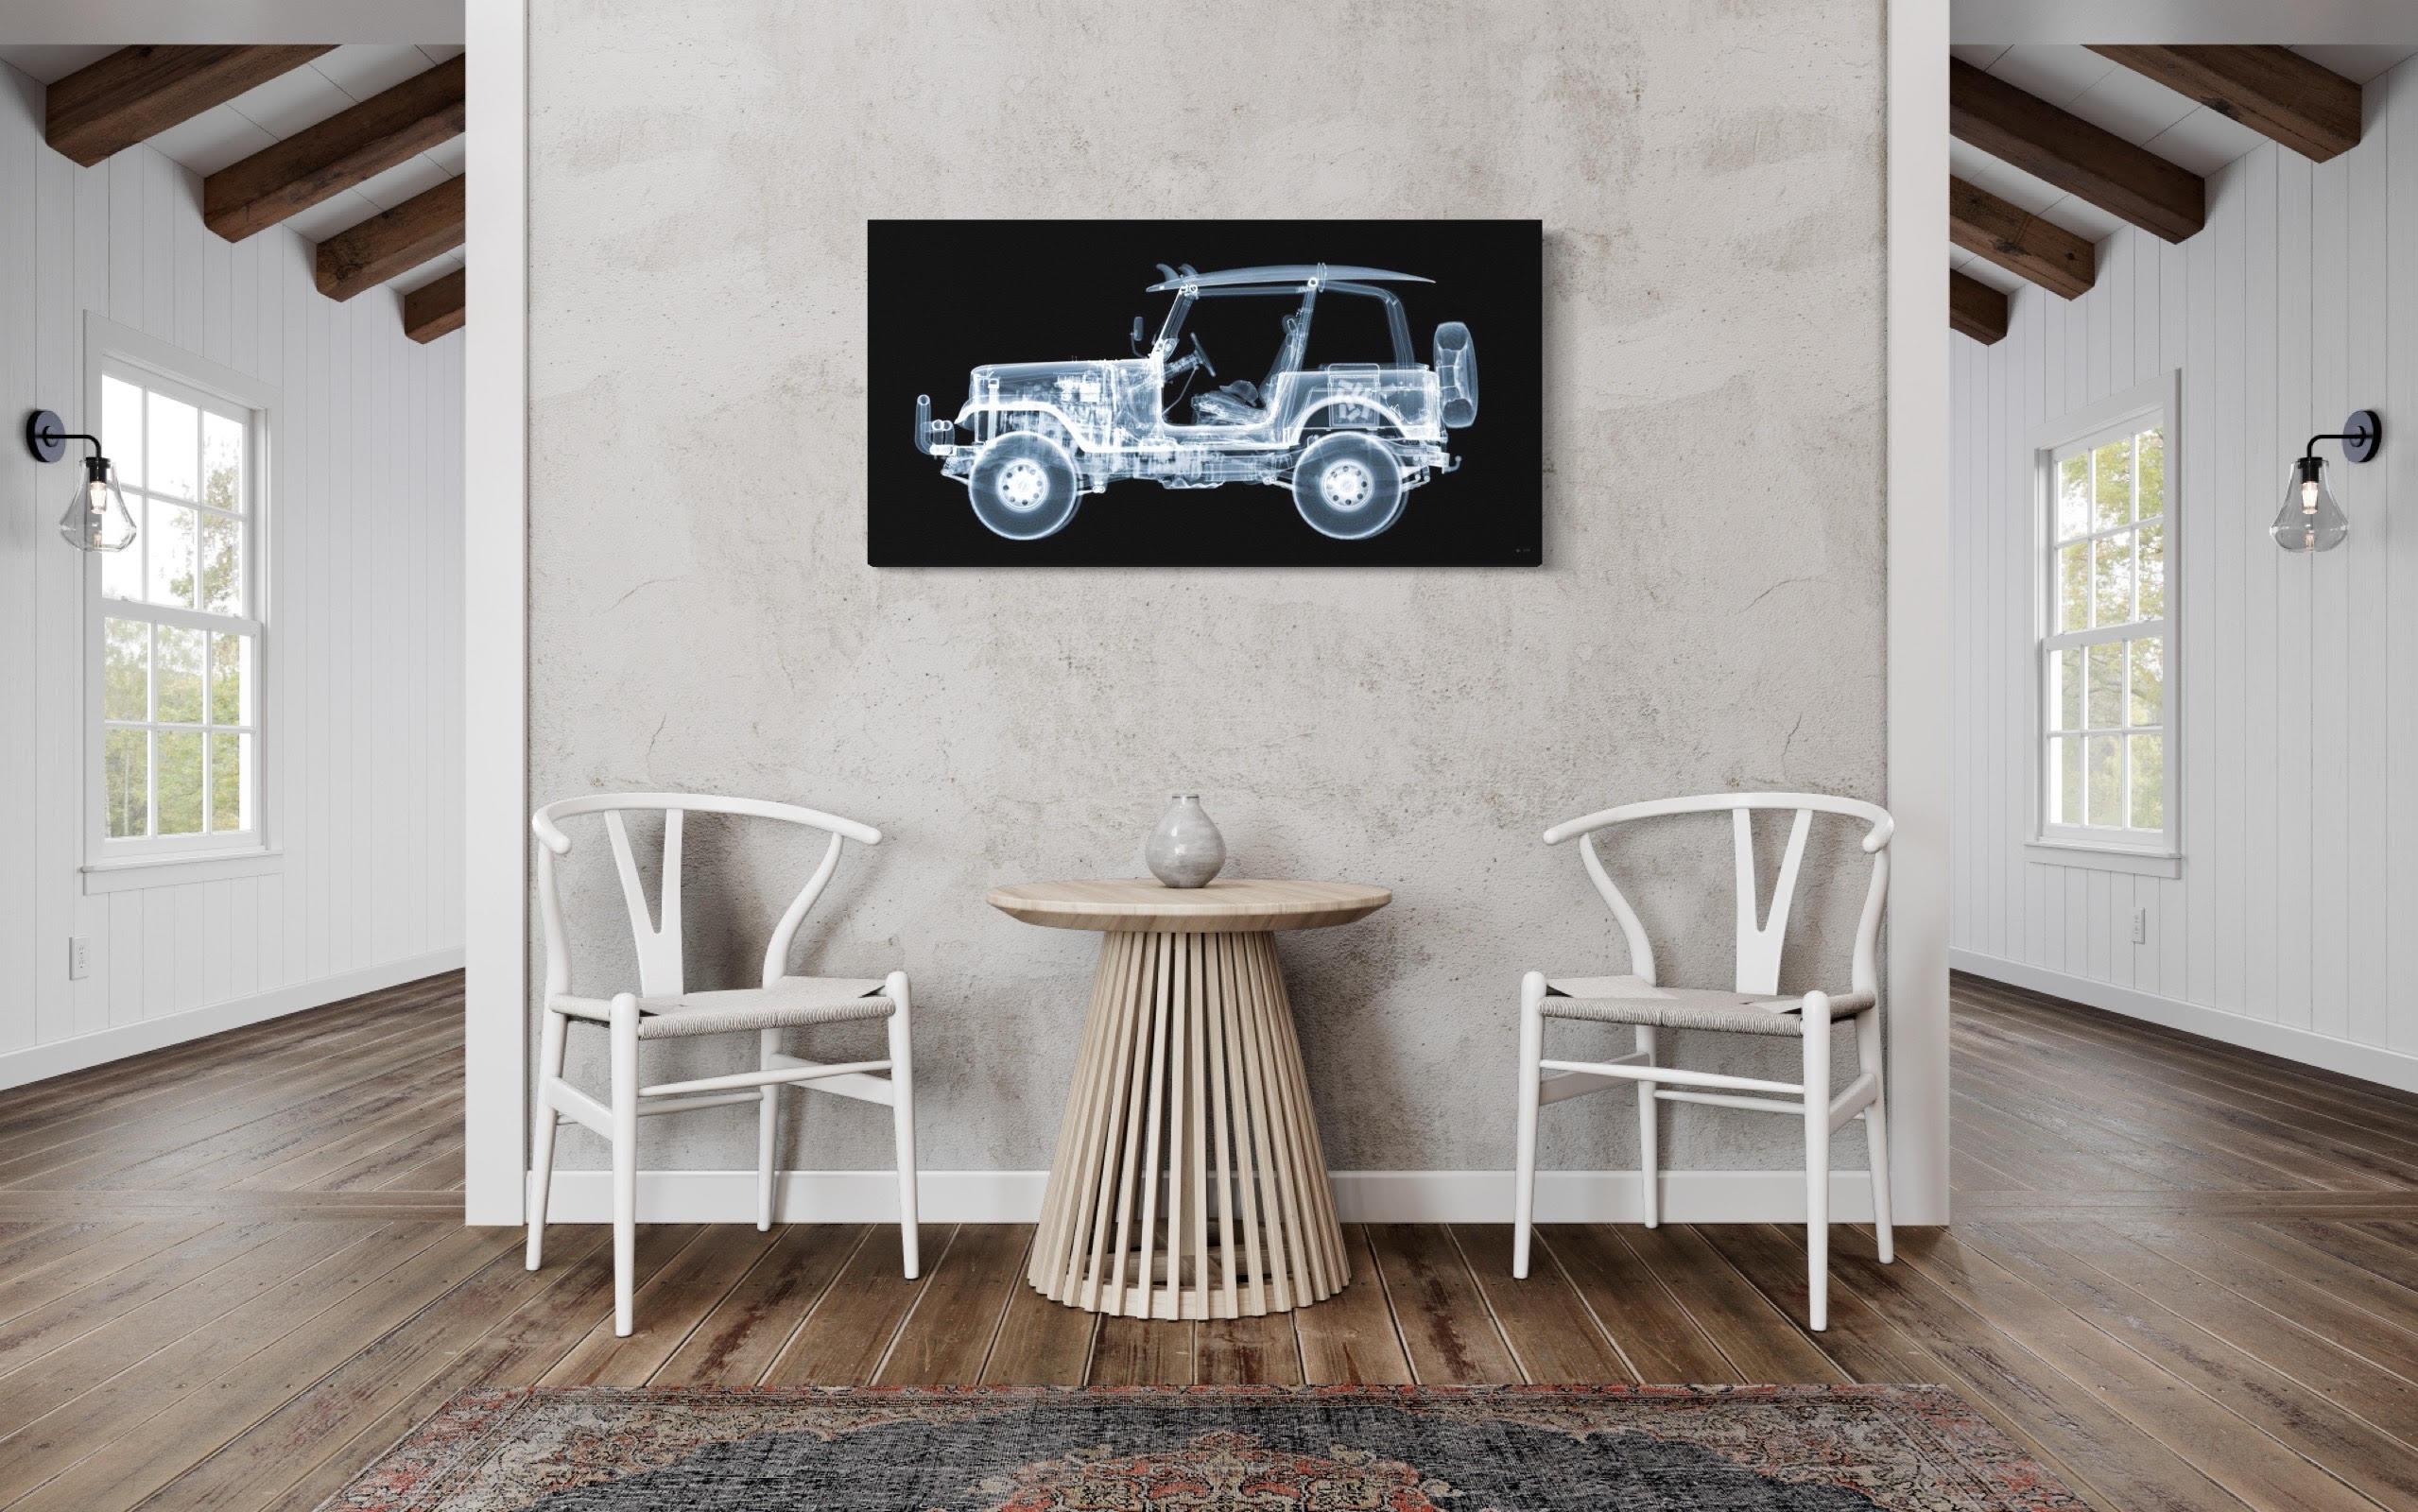 CJ Jeep Surfer
24 x 47 inches

Available in other sizes
36 x 71 inches
47 x 90 inches

X-Ray C-Type print with Diasec frame 
Limited Edition 2 of 25
Acquired from artist's studio, signed recto 

X-Ray print of a CJ Jeep.  Artist Nick Veasey explores